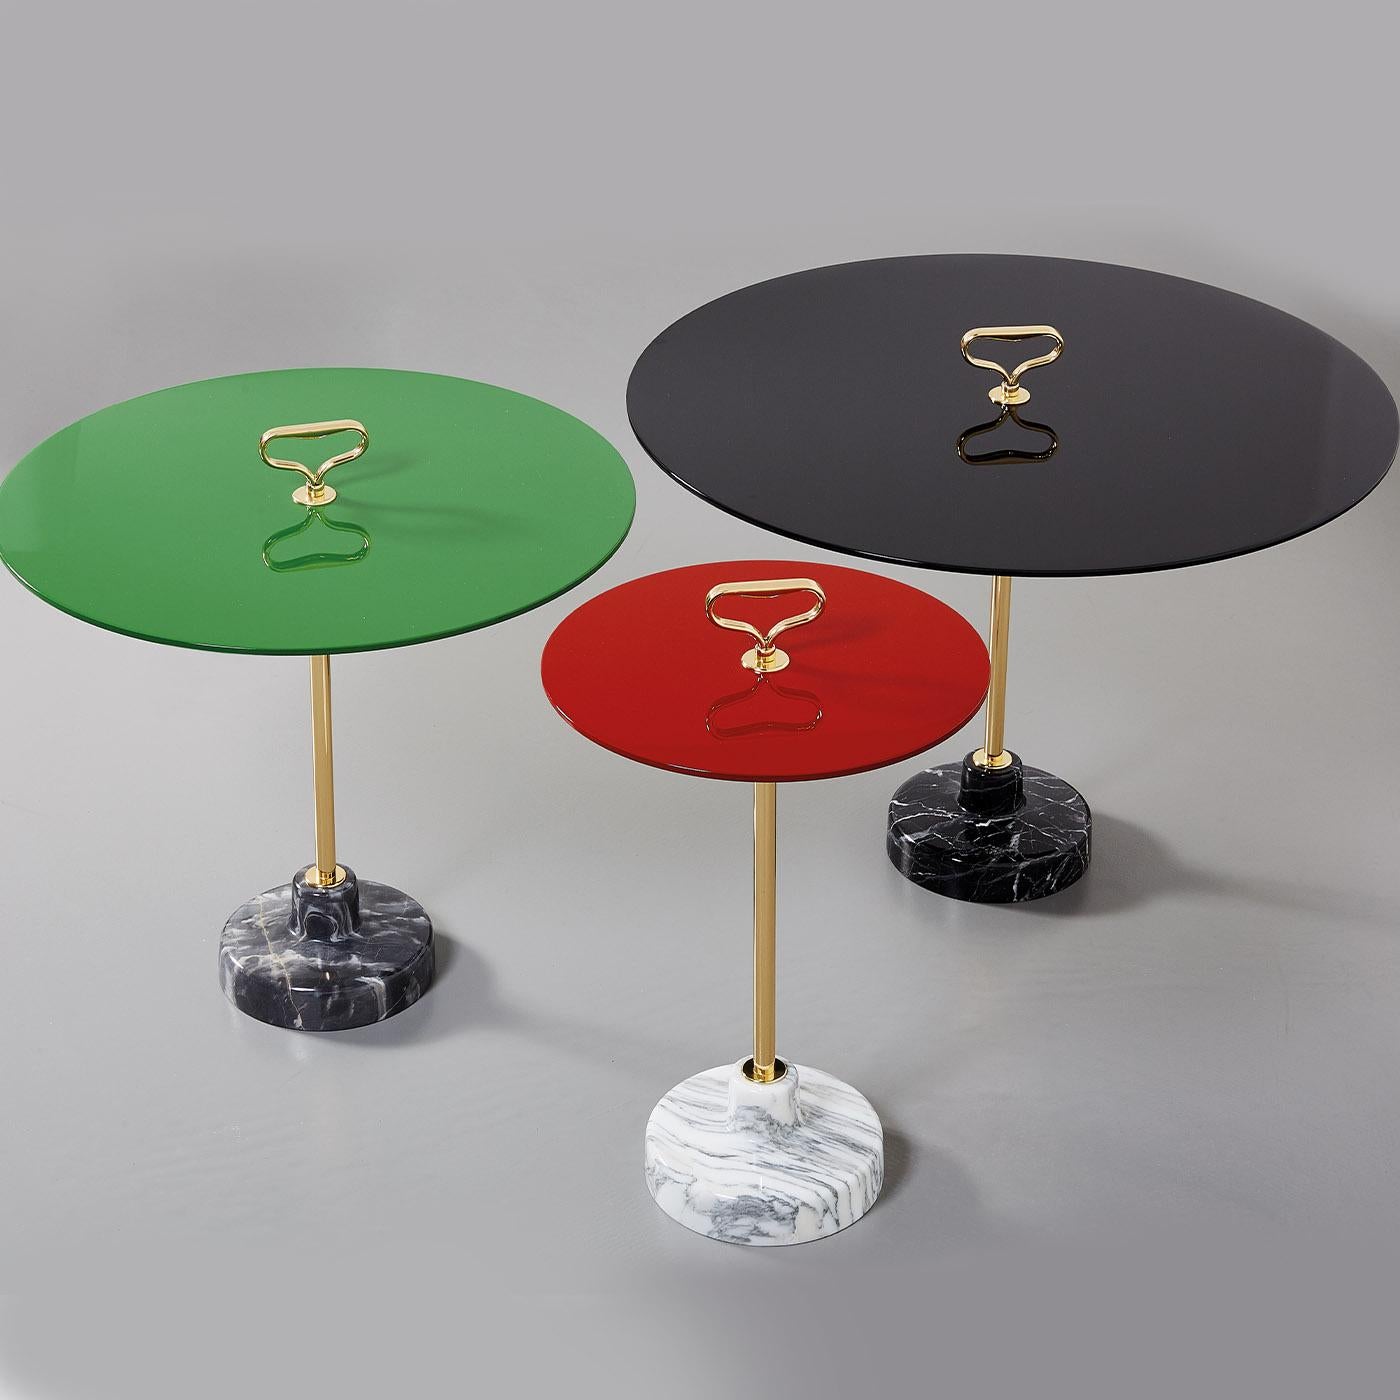 An exquisite design created by Ignazio Gardella for the Stand Collection of side tables, this gorgeous piece is distinguished by a vintage-inspired combination of hues. Resting on a black marble base, it features a brass stem topped with a practical